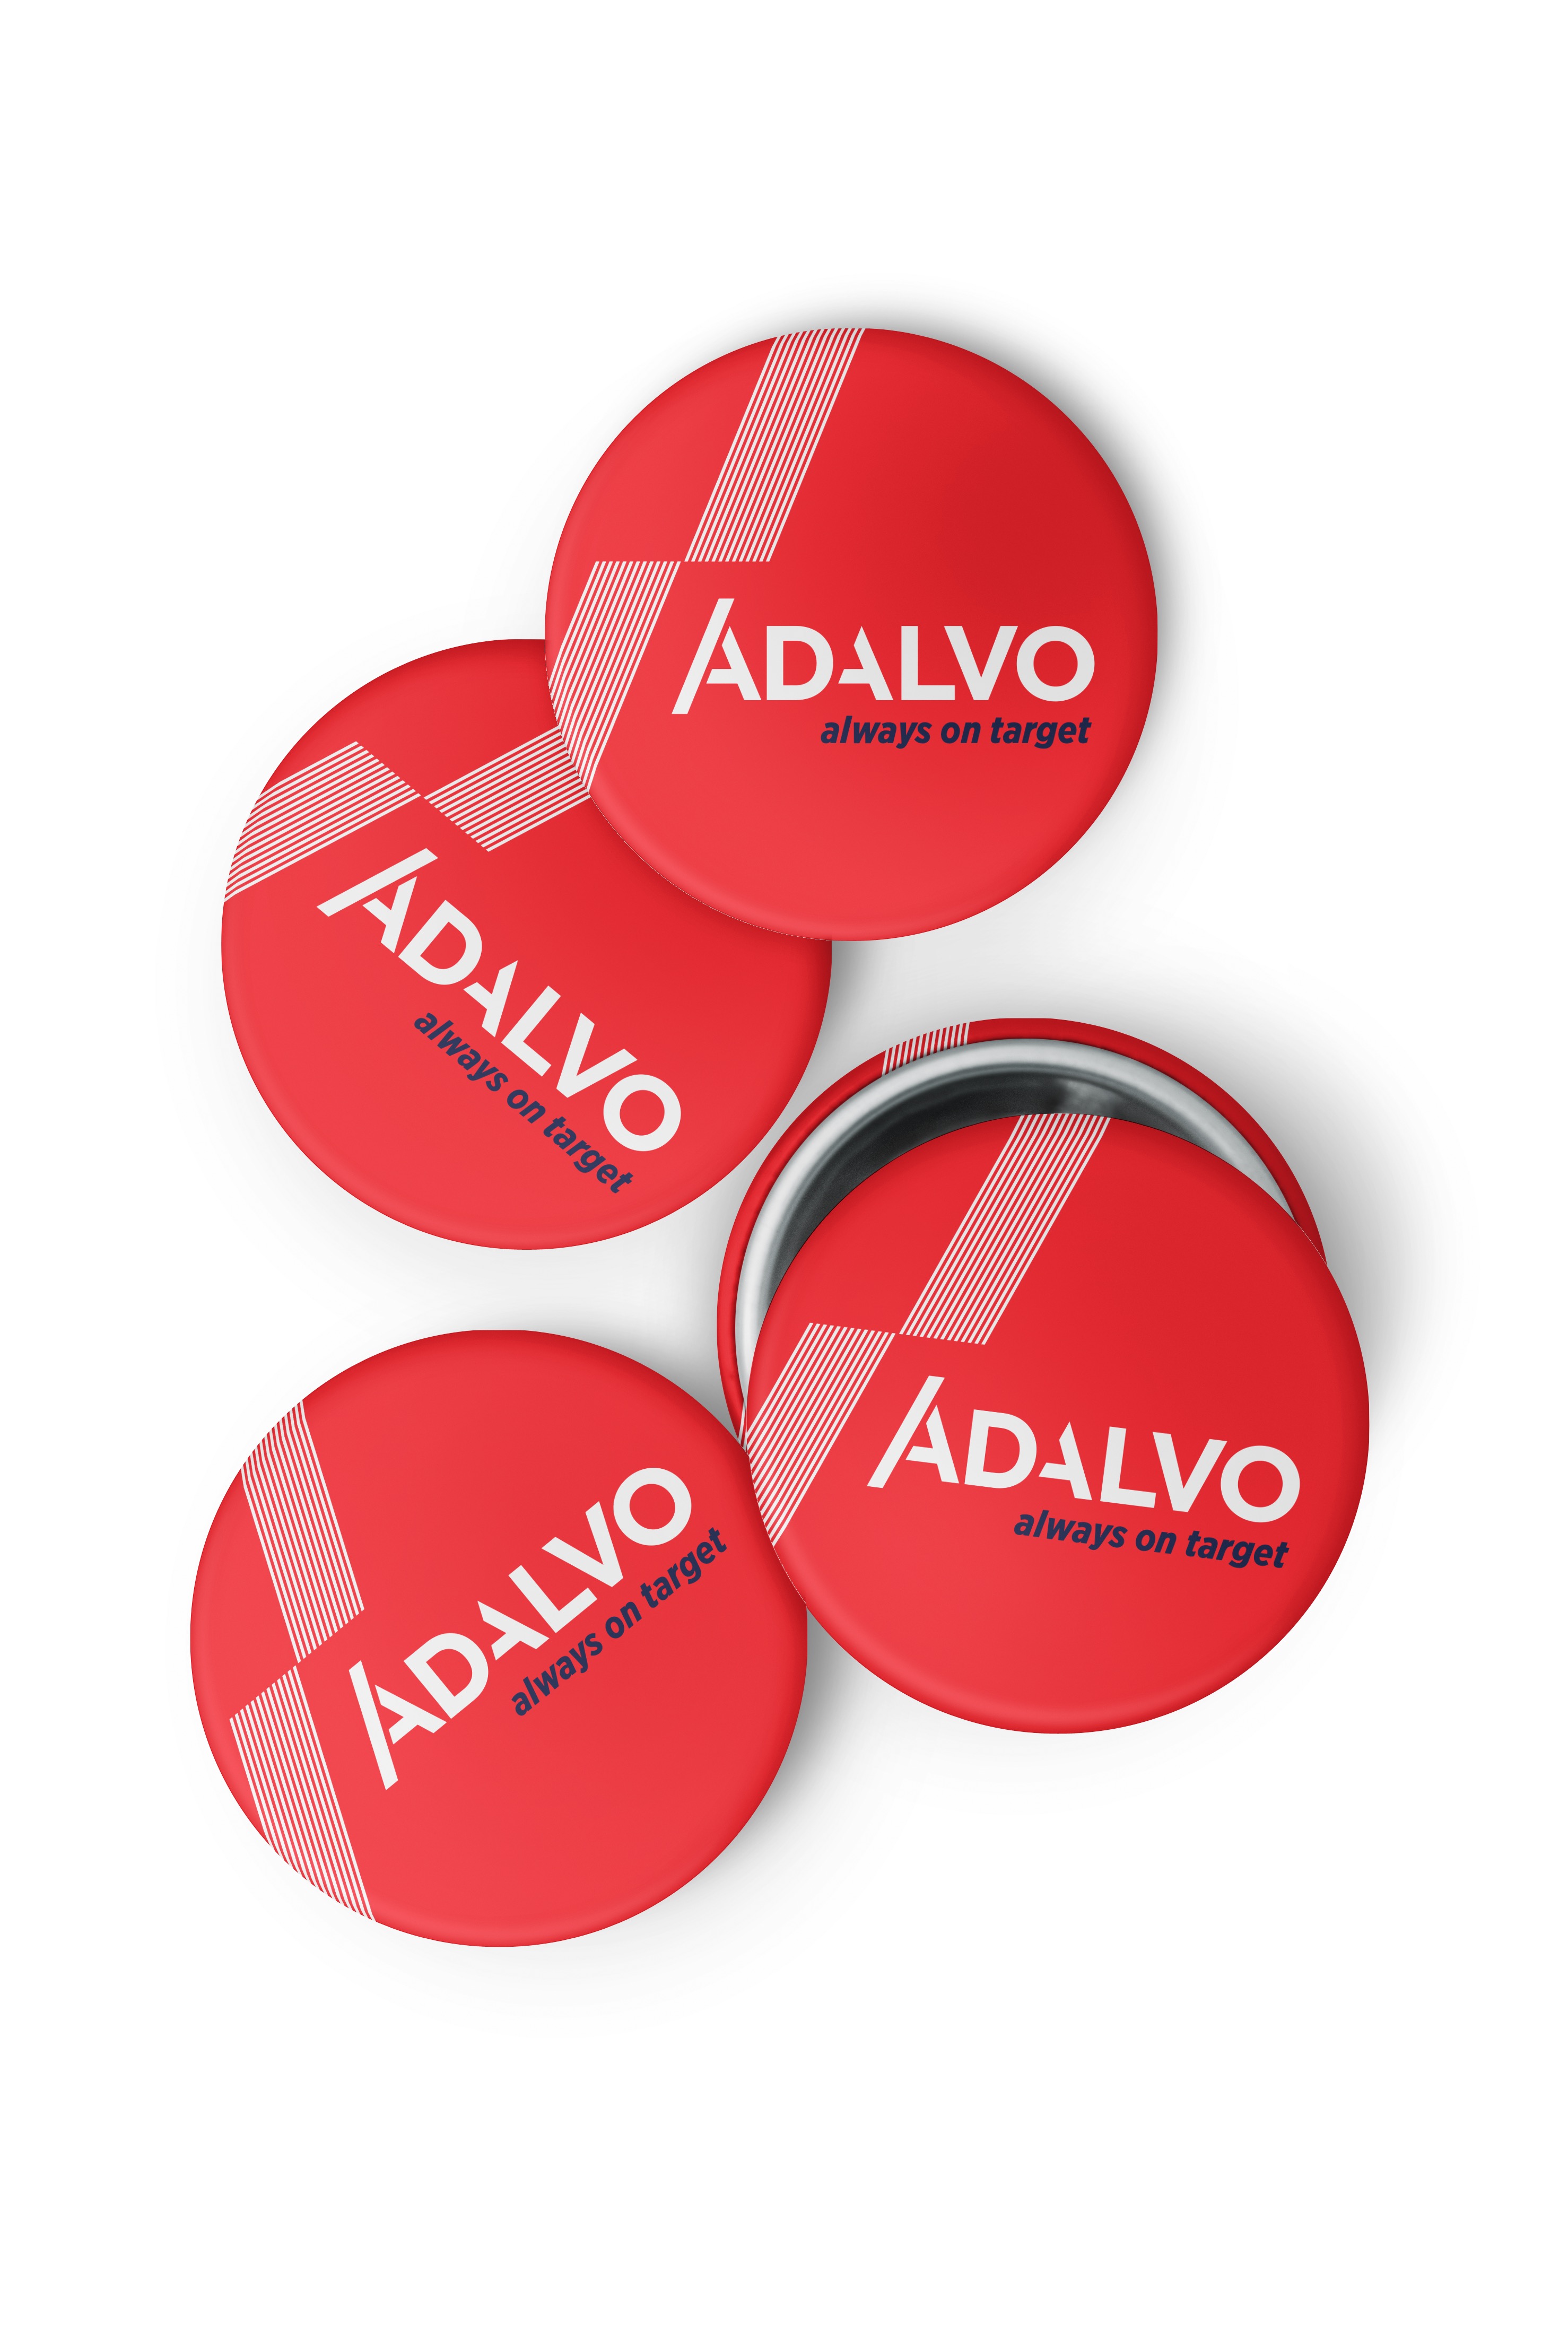 Adalvo announces successful DCP Submission for Desogestrel + Ethinylestradiol (0.15mg+0.02mg) film coated tablets